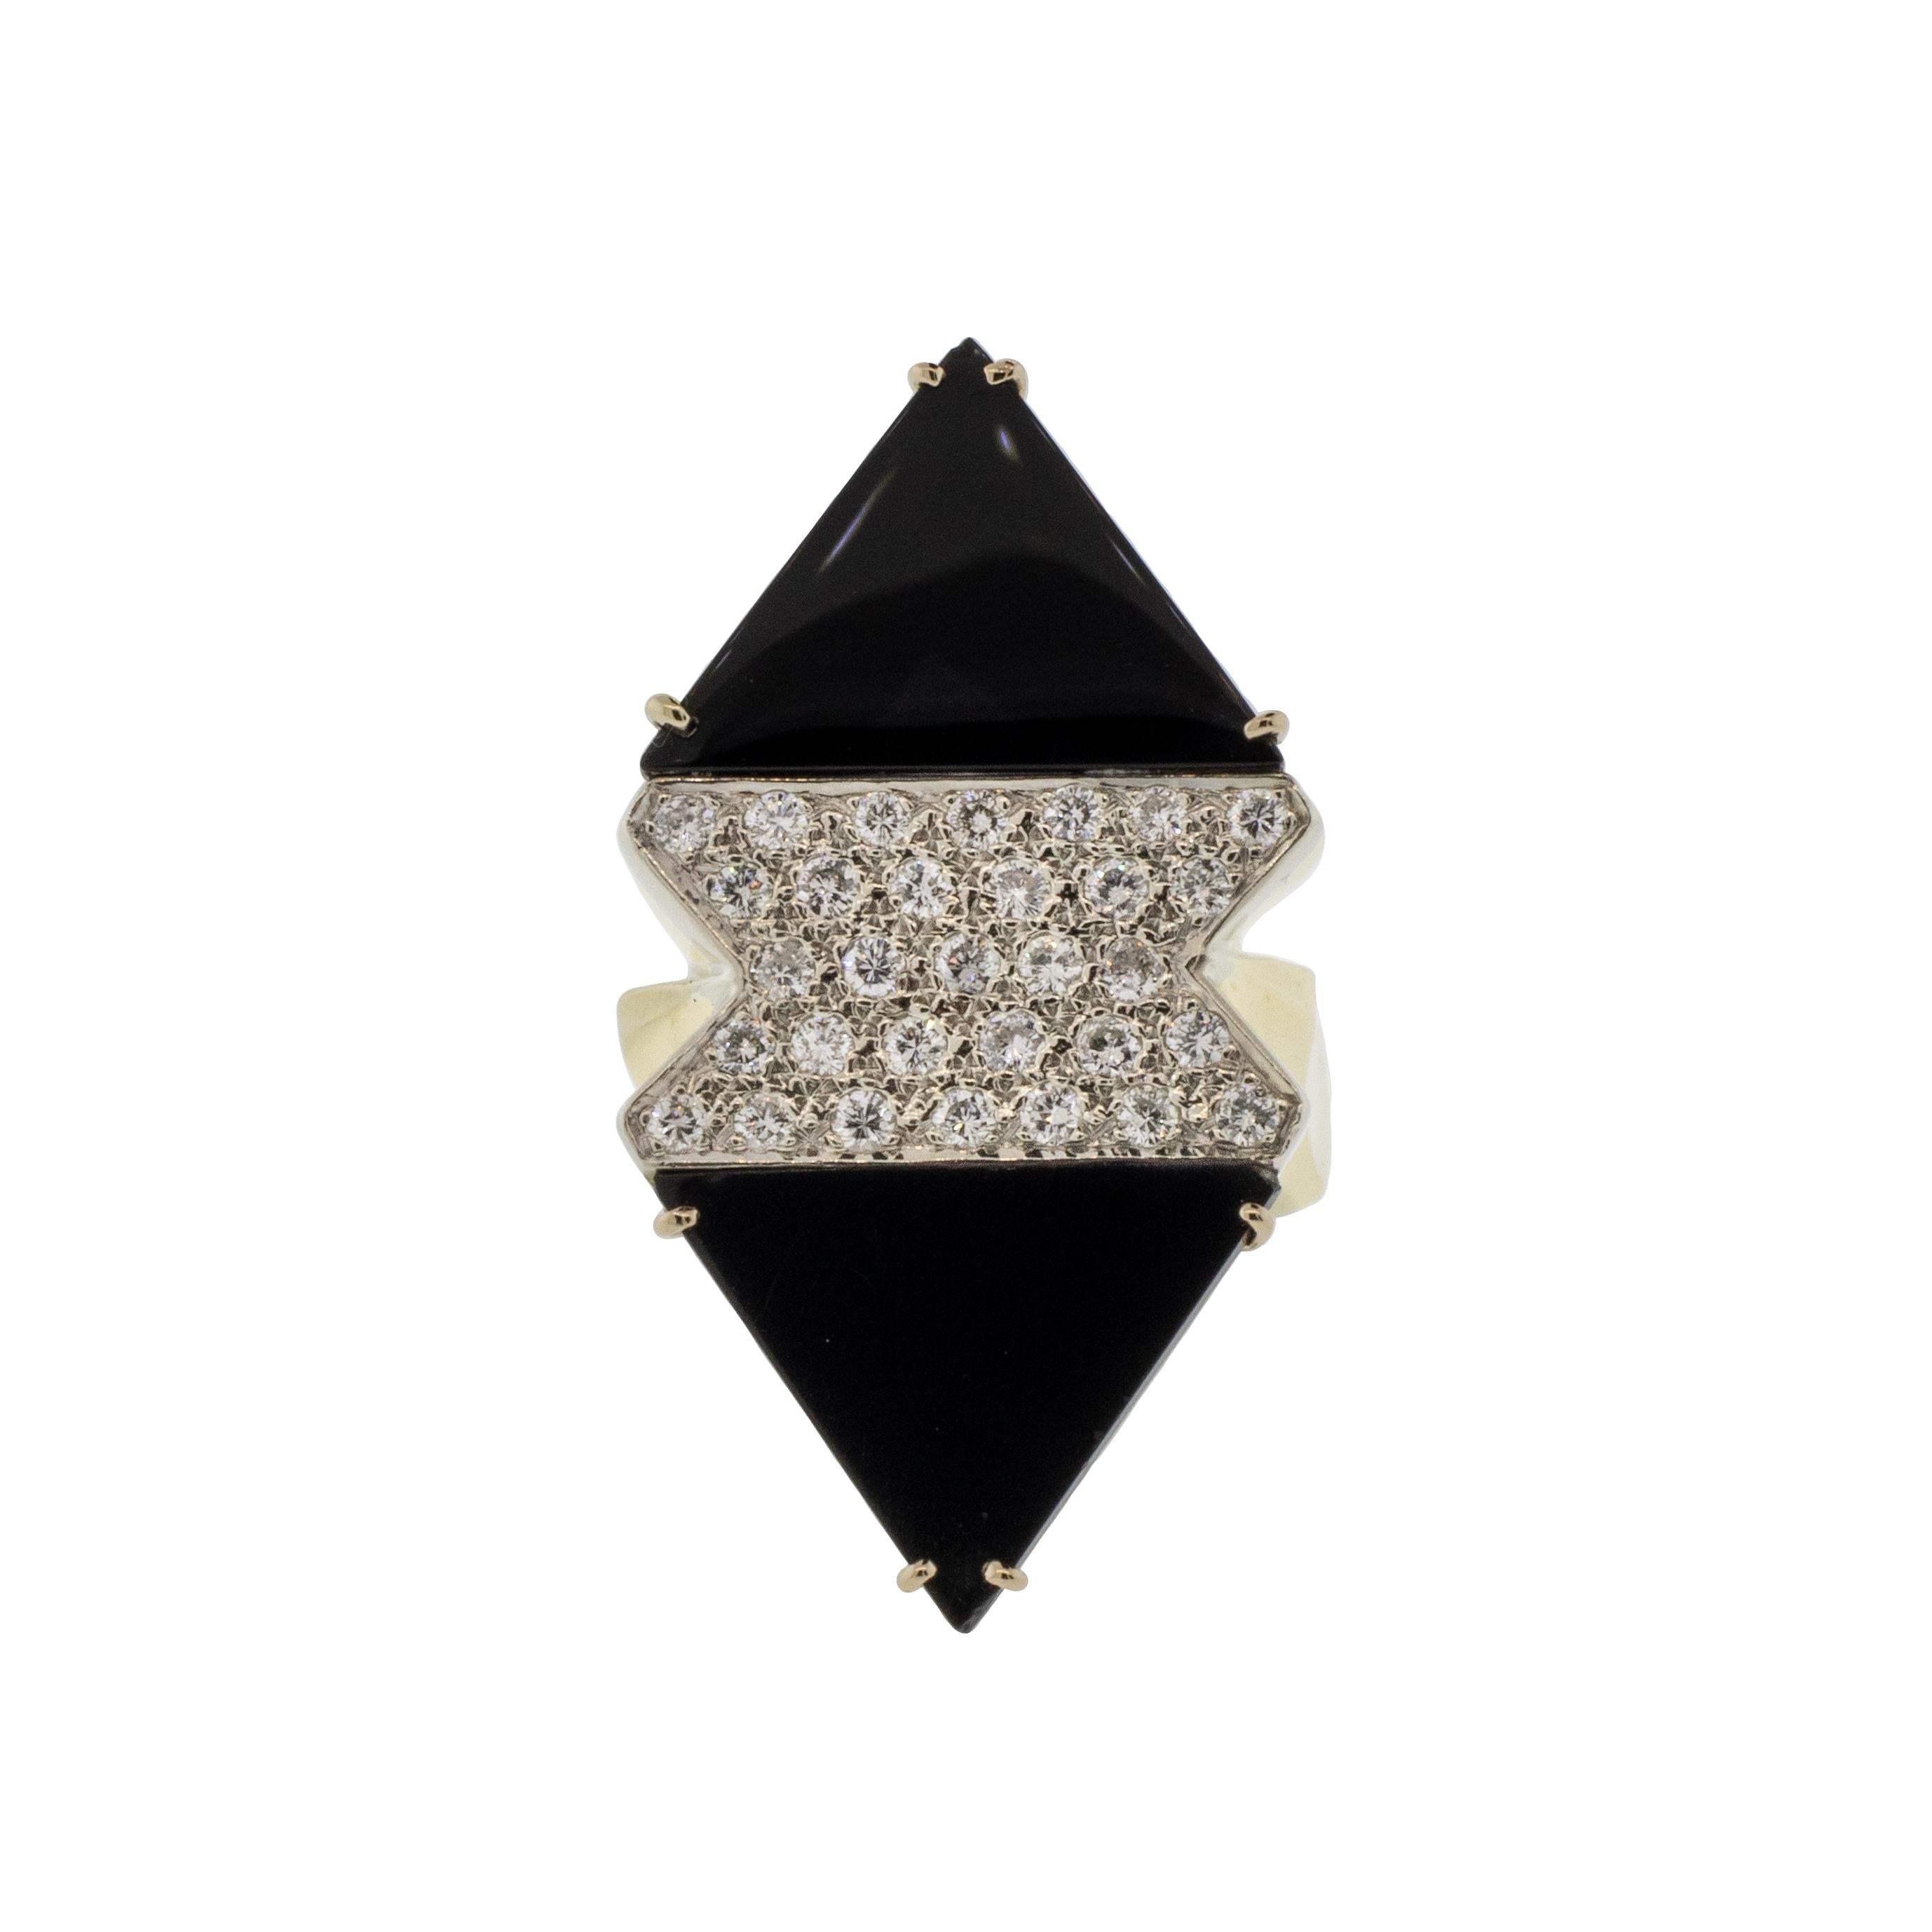 Indulge in luxury with our onyx and diamond cocktail ring! This opulent piece features a stunning .86ctw of sparkling diamonds set against bold black onyx, all in 18k yellow gold. With G-I color and VS1-SI1 clarity diamonds, this ring is sure to